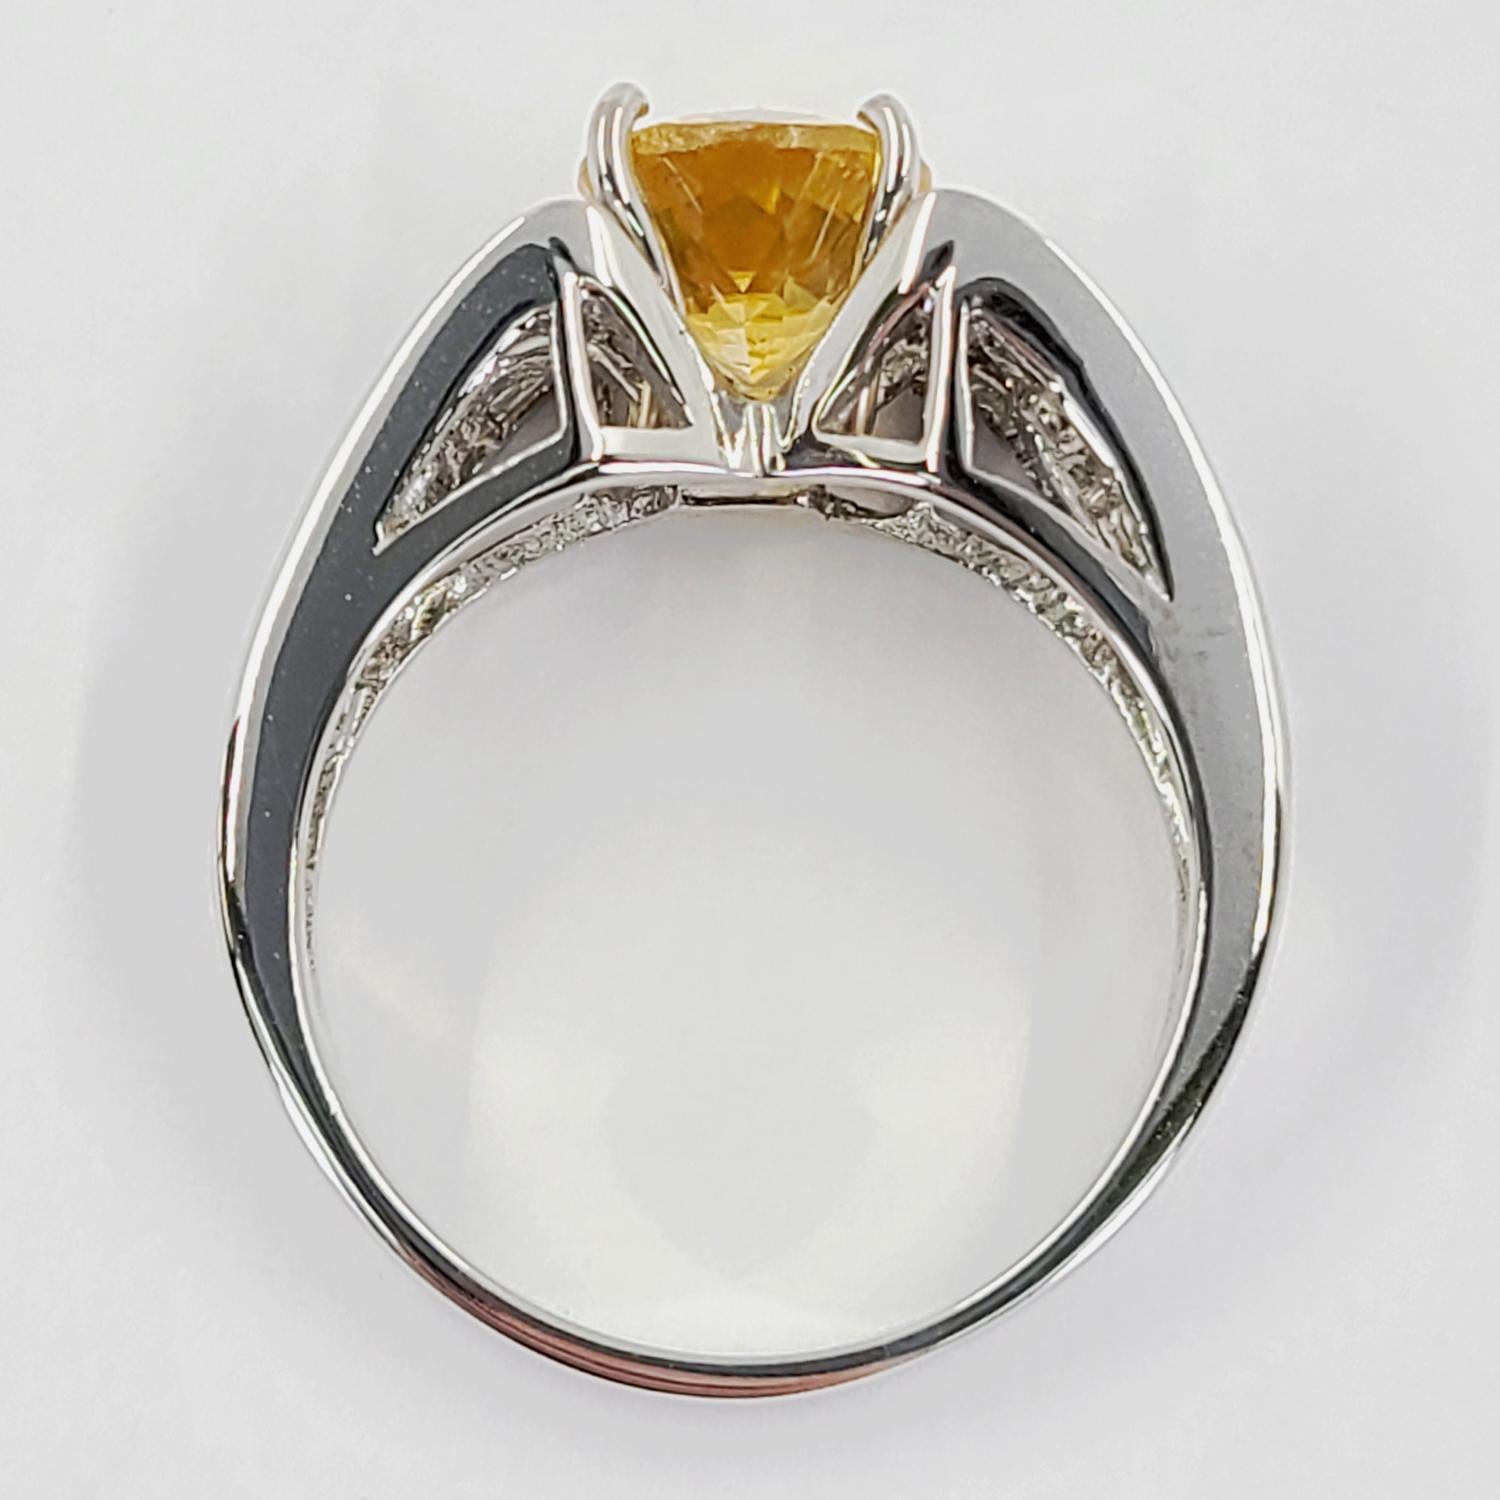 White Gold, Diamond and Citrine Ring In Good Condition For Sale In Coral Gables, FL